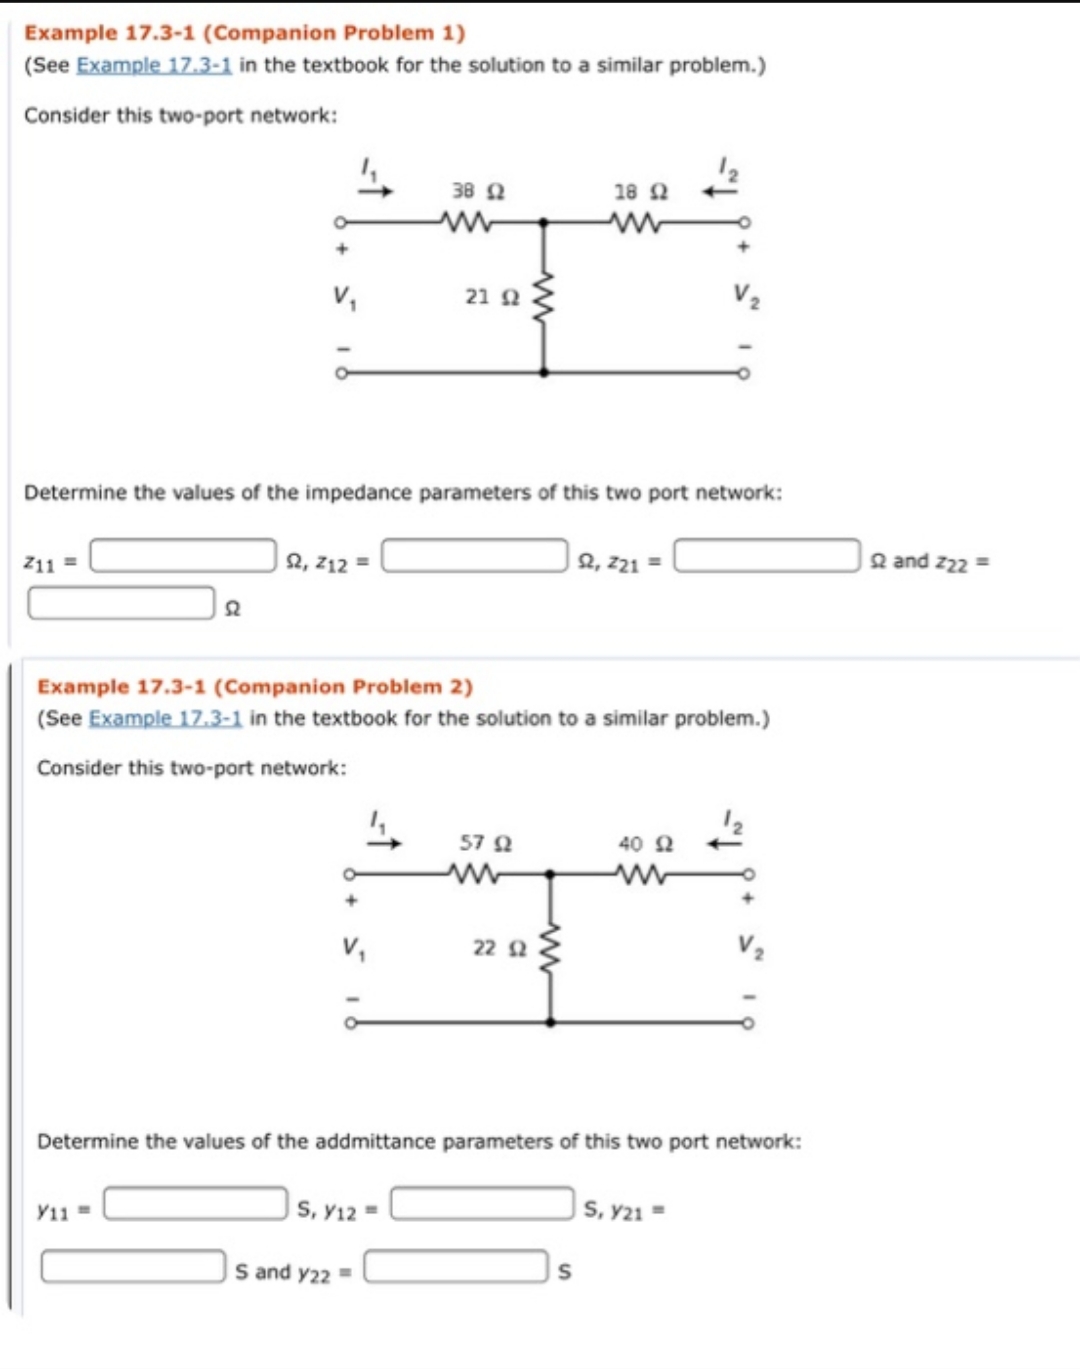 Example 17.3-1 (Companion Problem 1)
(See Example 17.3-1 in the textbook for the solution to a similar problem.)
Consider this two-port network:
38Q
18 Q
21 Q
Determine the values of the impedance parameters of this two port network:
| 2, 21 =
2, 212
Qand z22
Z11
Example 17.3-1 (Companion Problem 2)
(See Example 17.3-1 in the textbook for the solution to a similar problem.)
Consider this two-port network:
57 Q
40
22 Q
Determine the values of the addmittance parameters of this two port network:
s, y21
S, y12
Y11
S and y22
